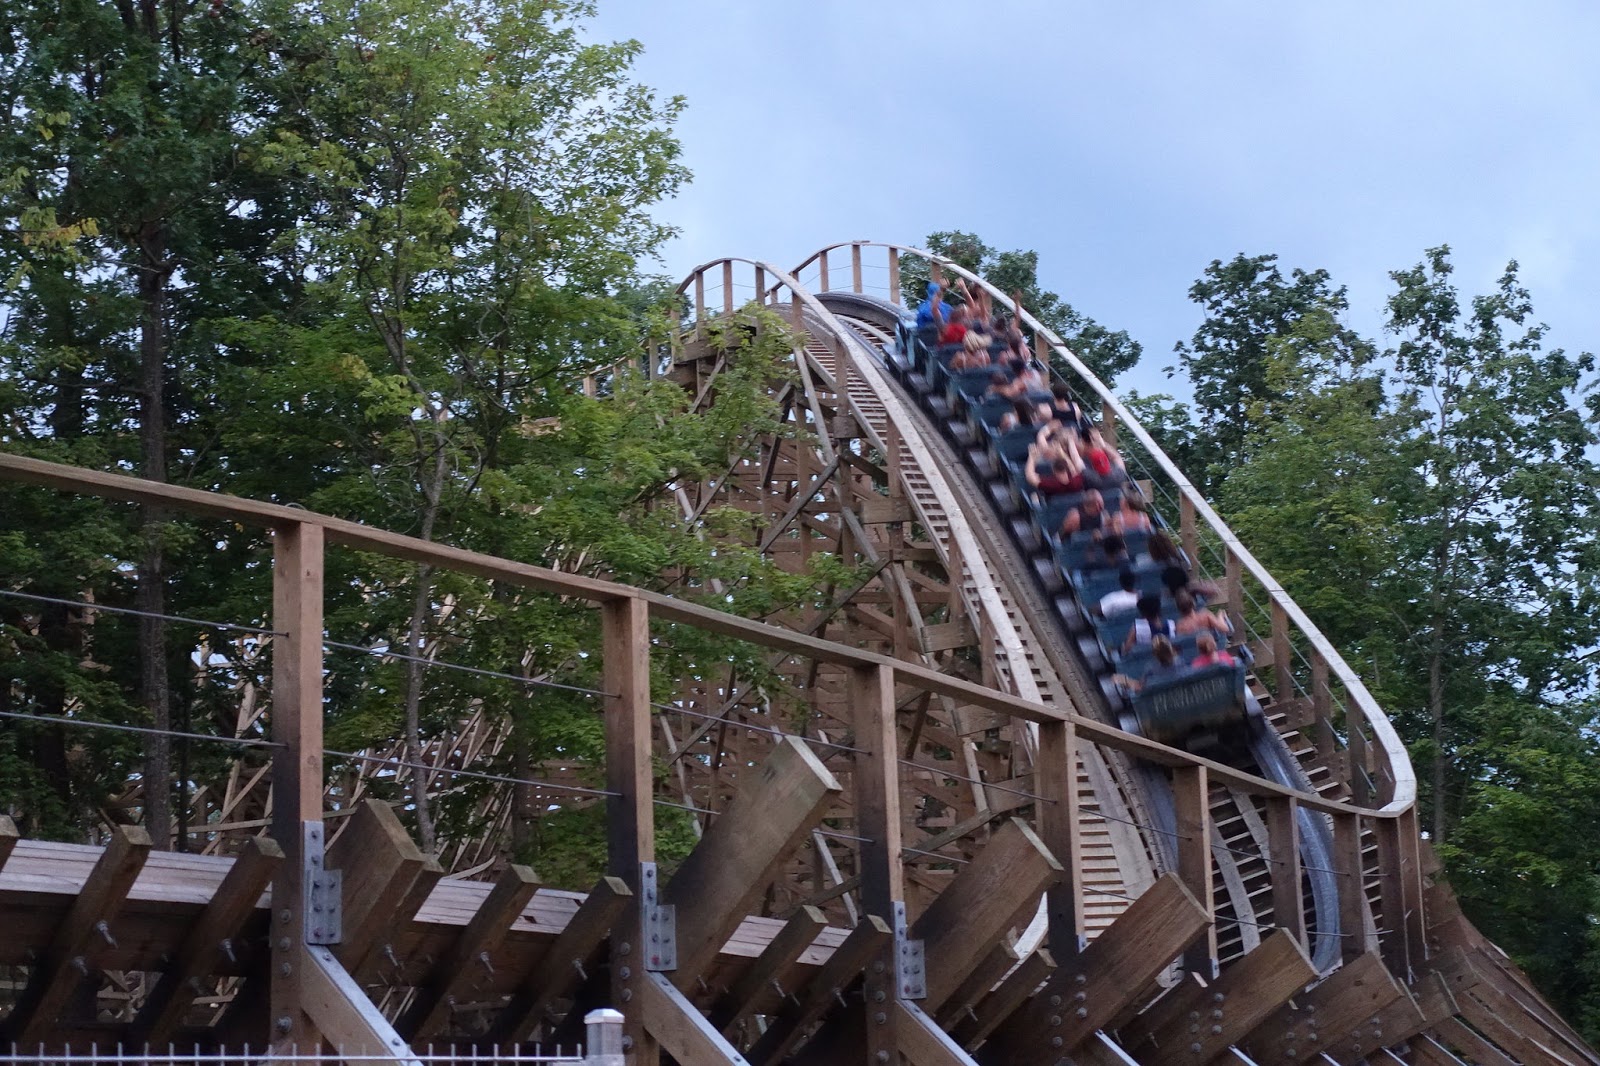 Mystic Timbers, a new wooden coaster, coming to Kings Island in 2017